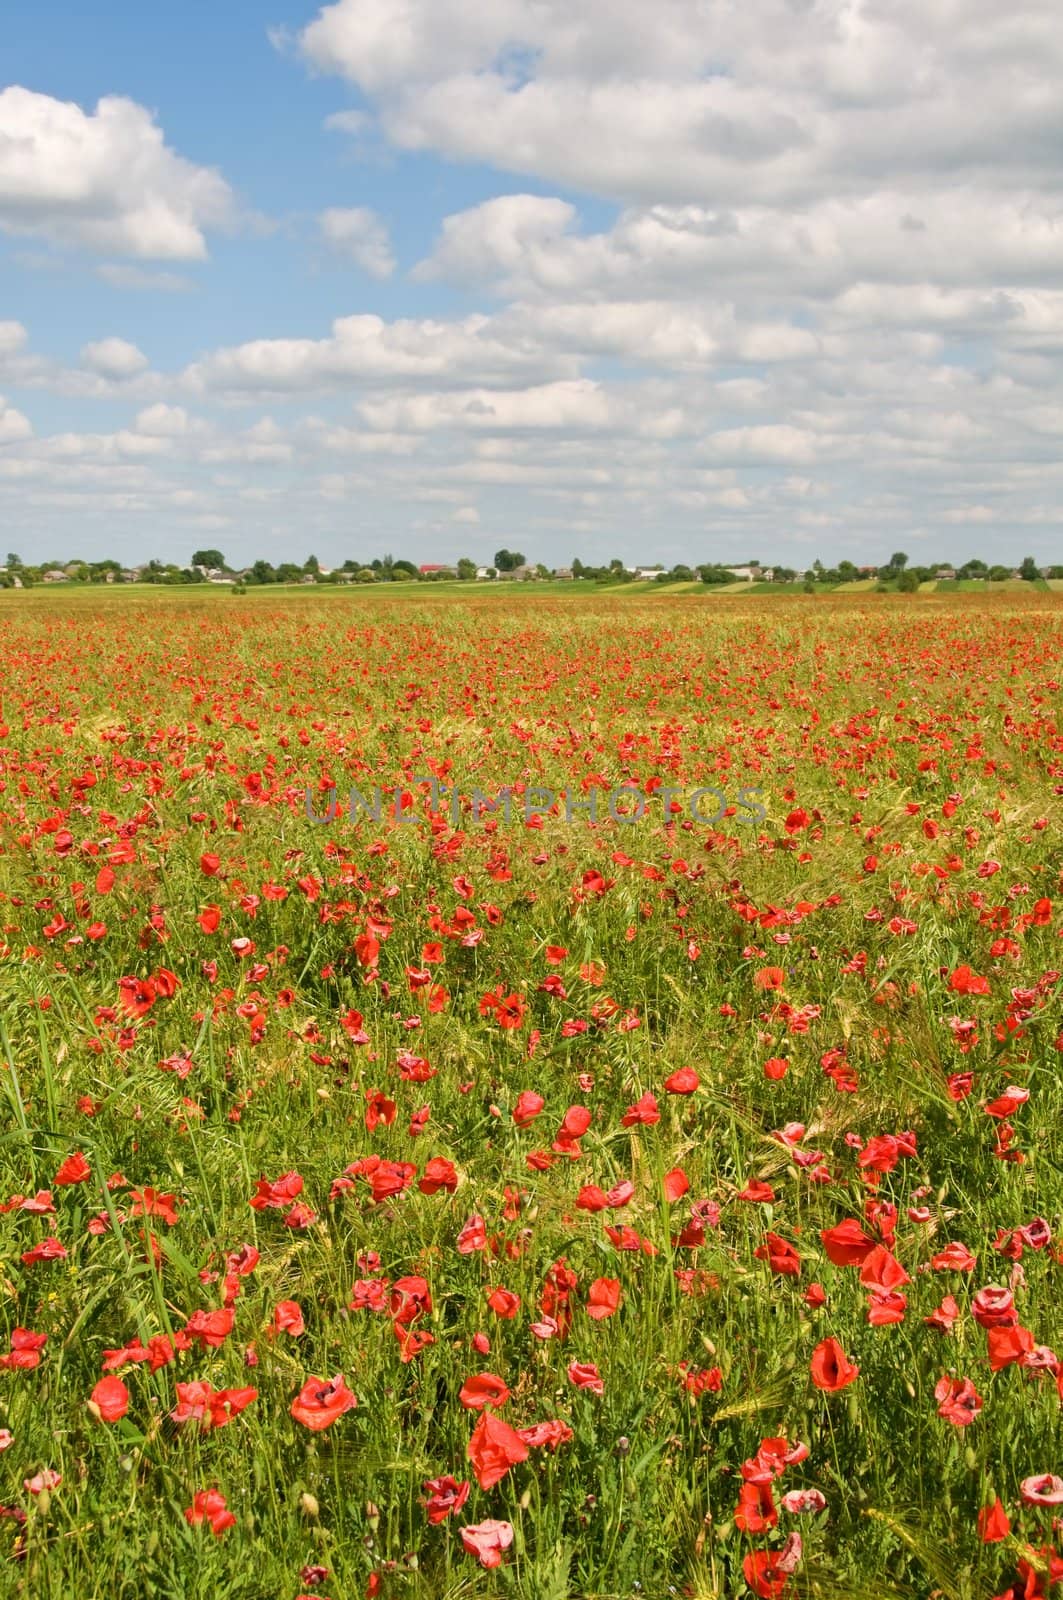 Red poppies in rural field with a village on background